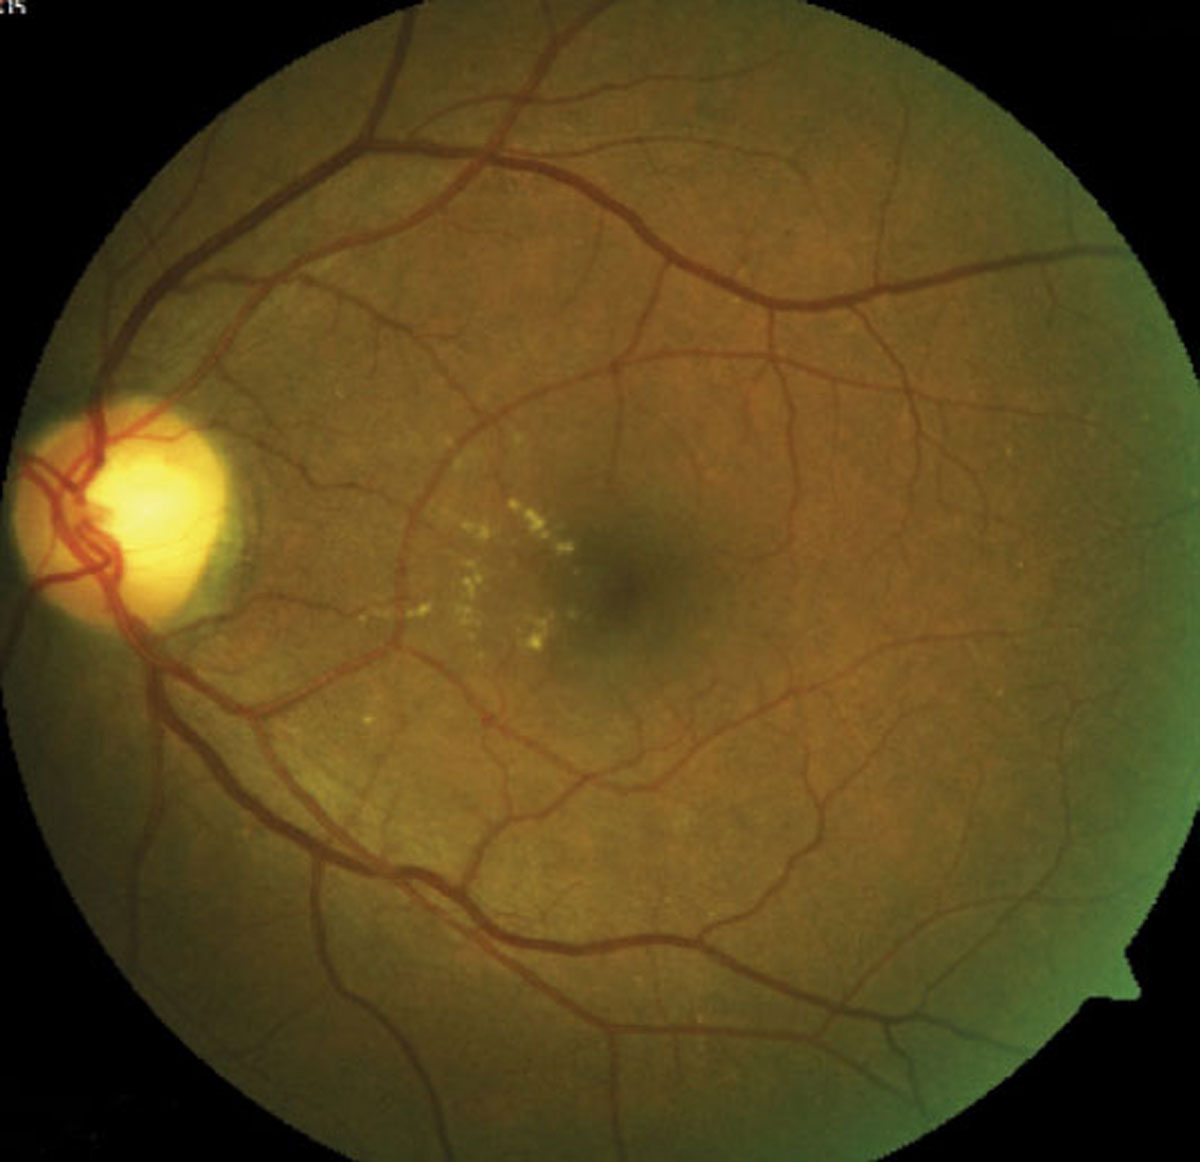 Efforts to ensure a fluid-free macula will help optimize visual outcomes.